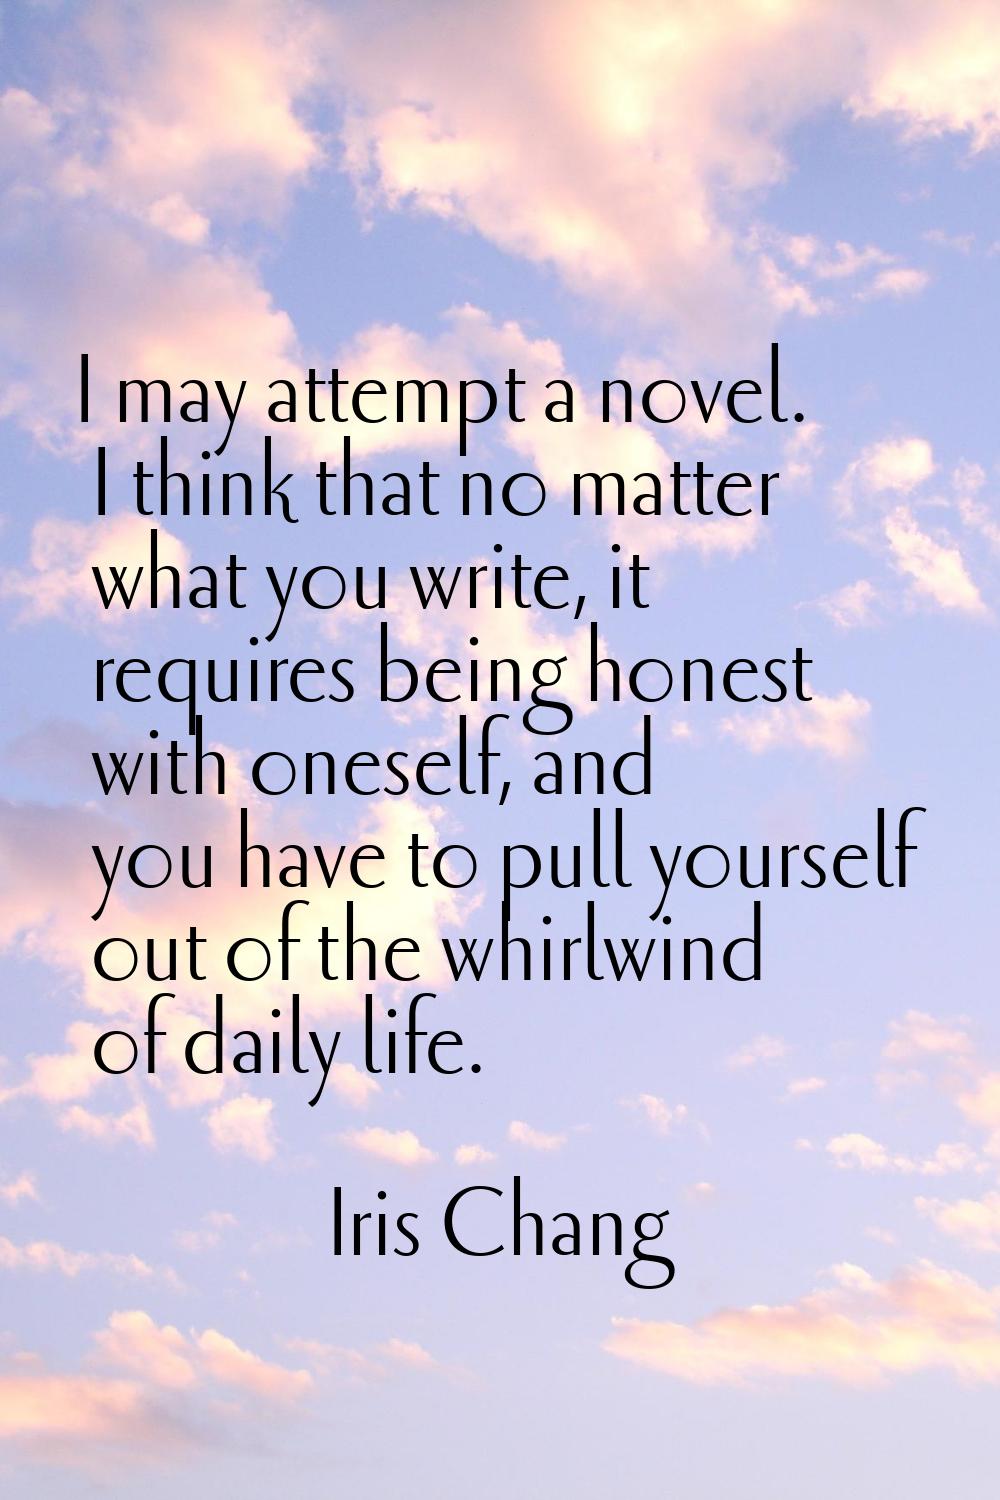 I may attempt a novel. I think that no matter what you write, it requires being honest with oneself